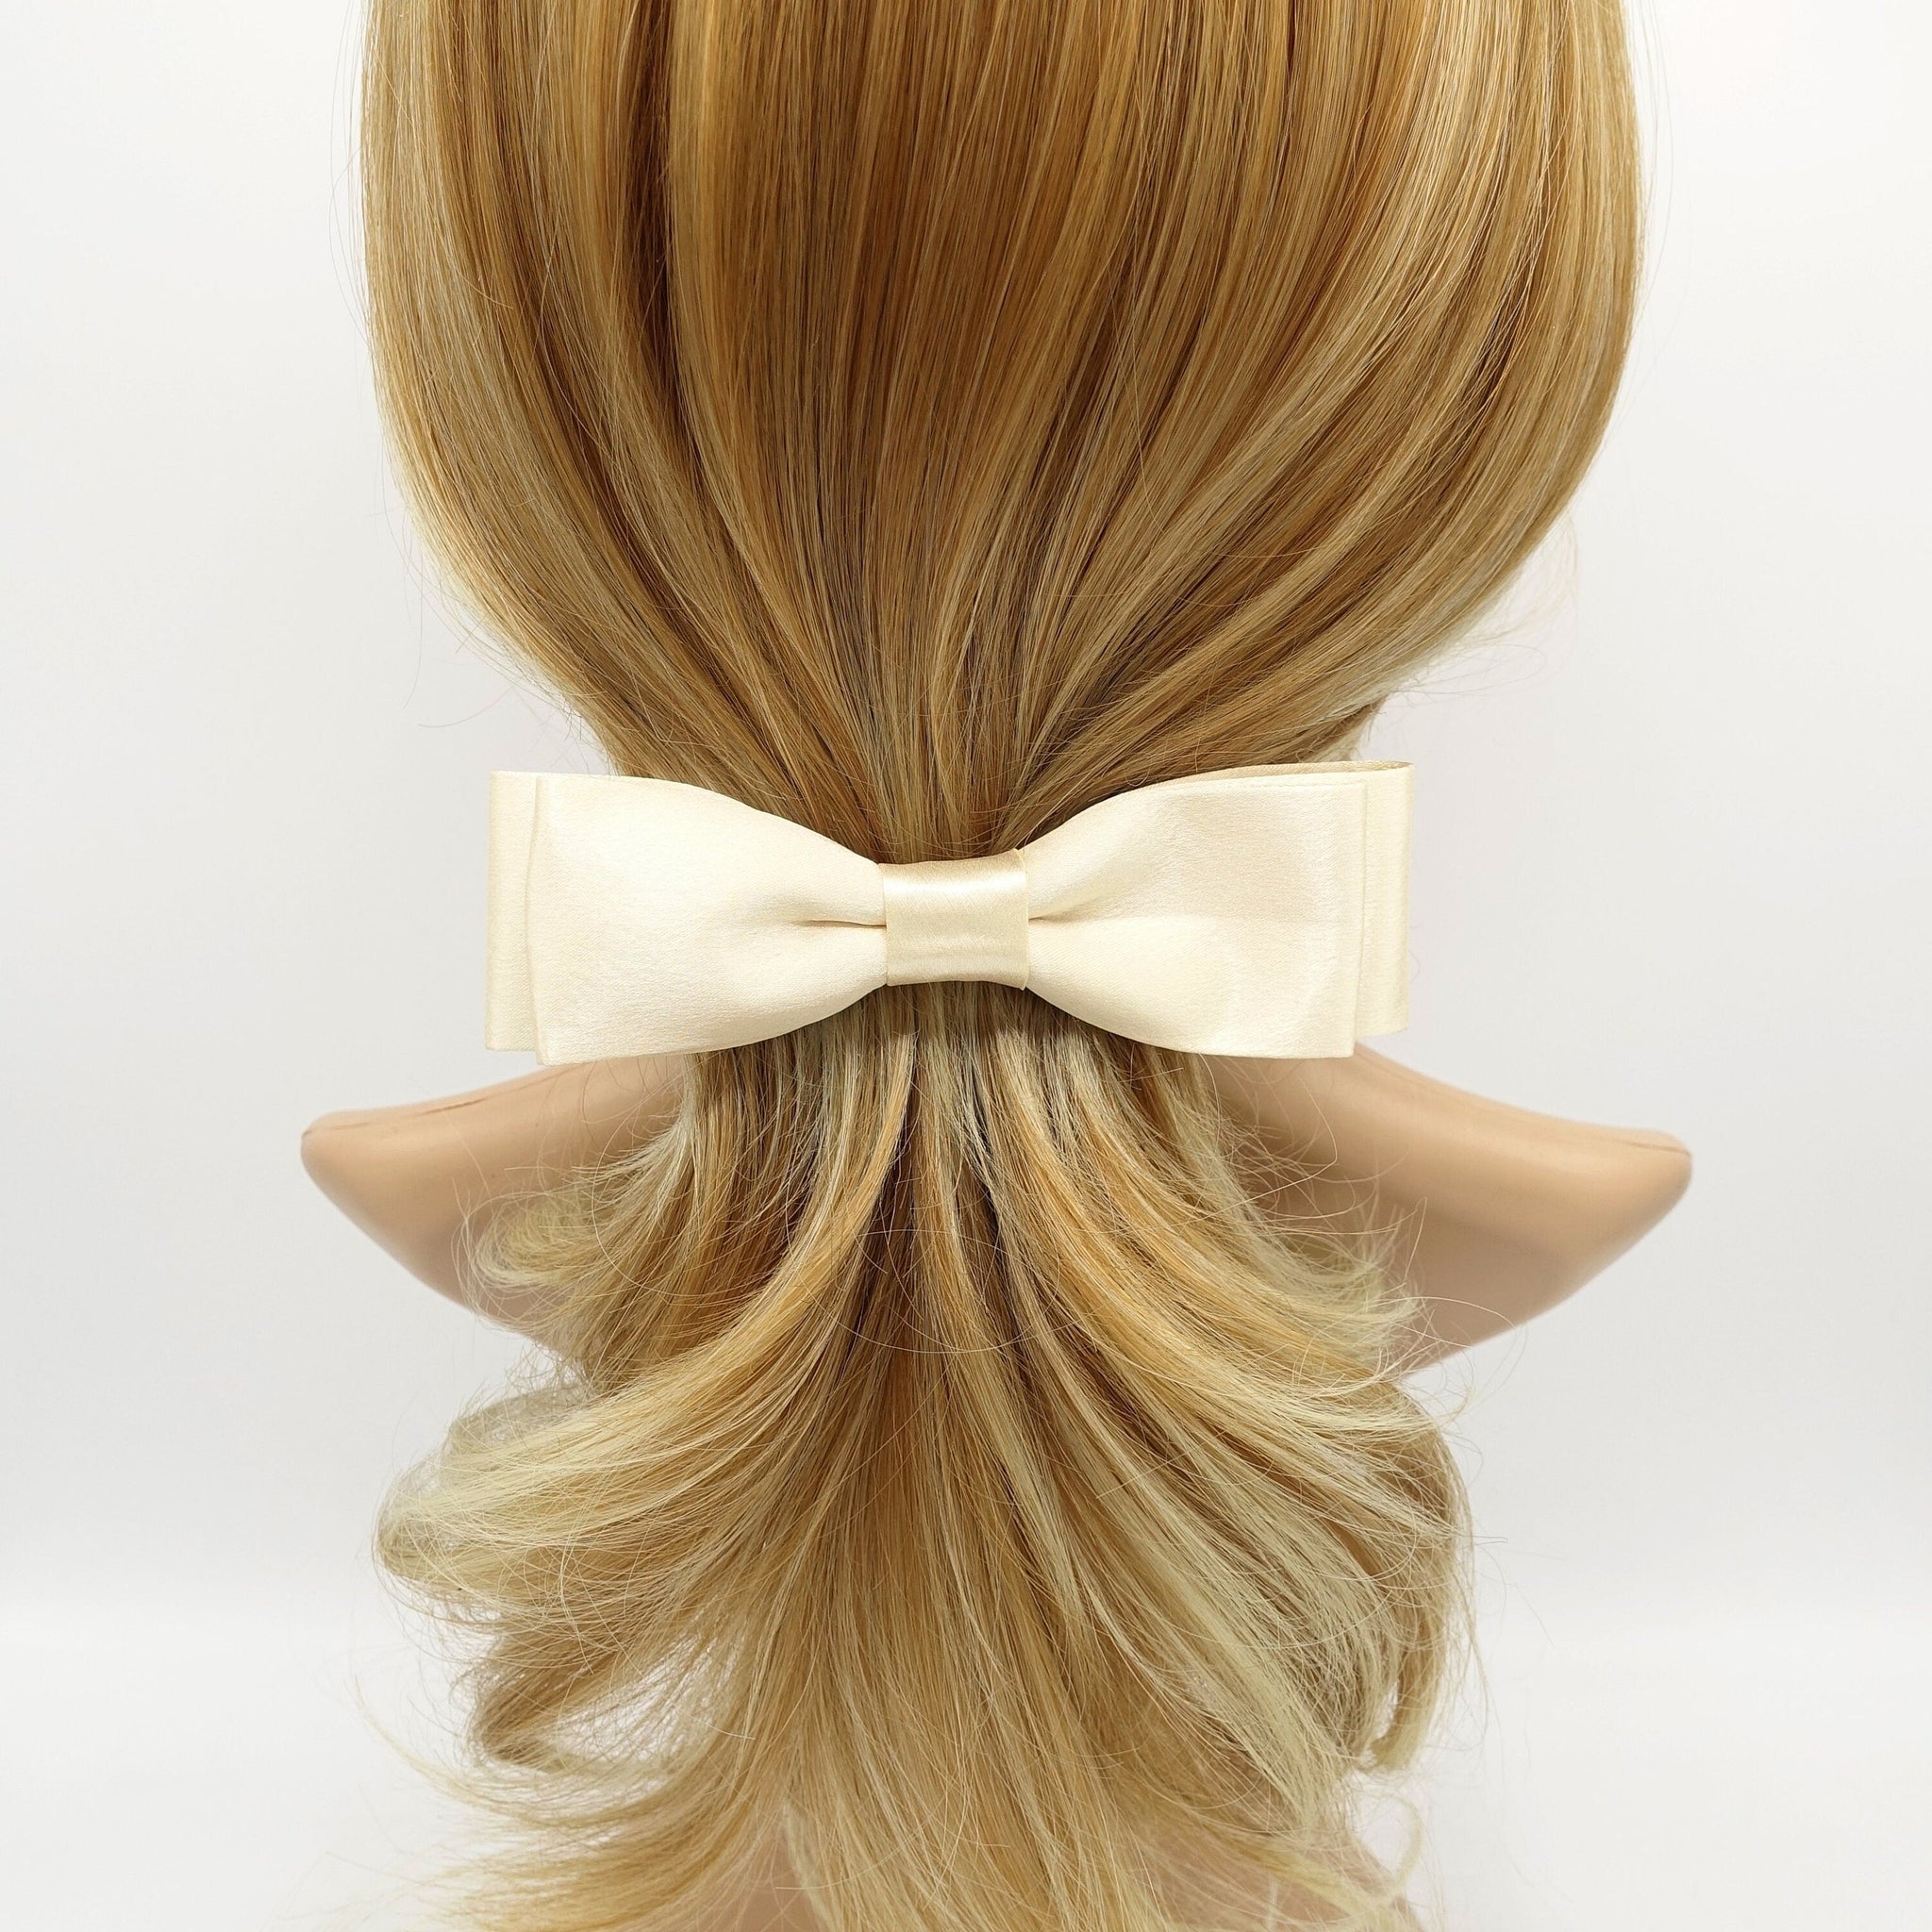 VeryShine Barrette (Bow) glossy satin layered hair bow basic style for women